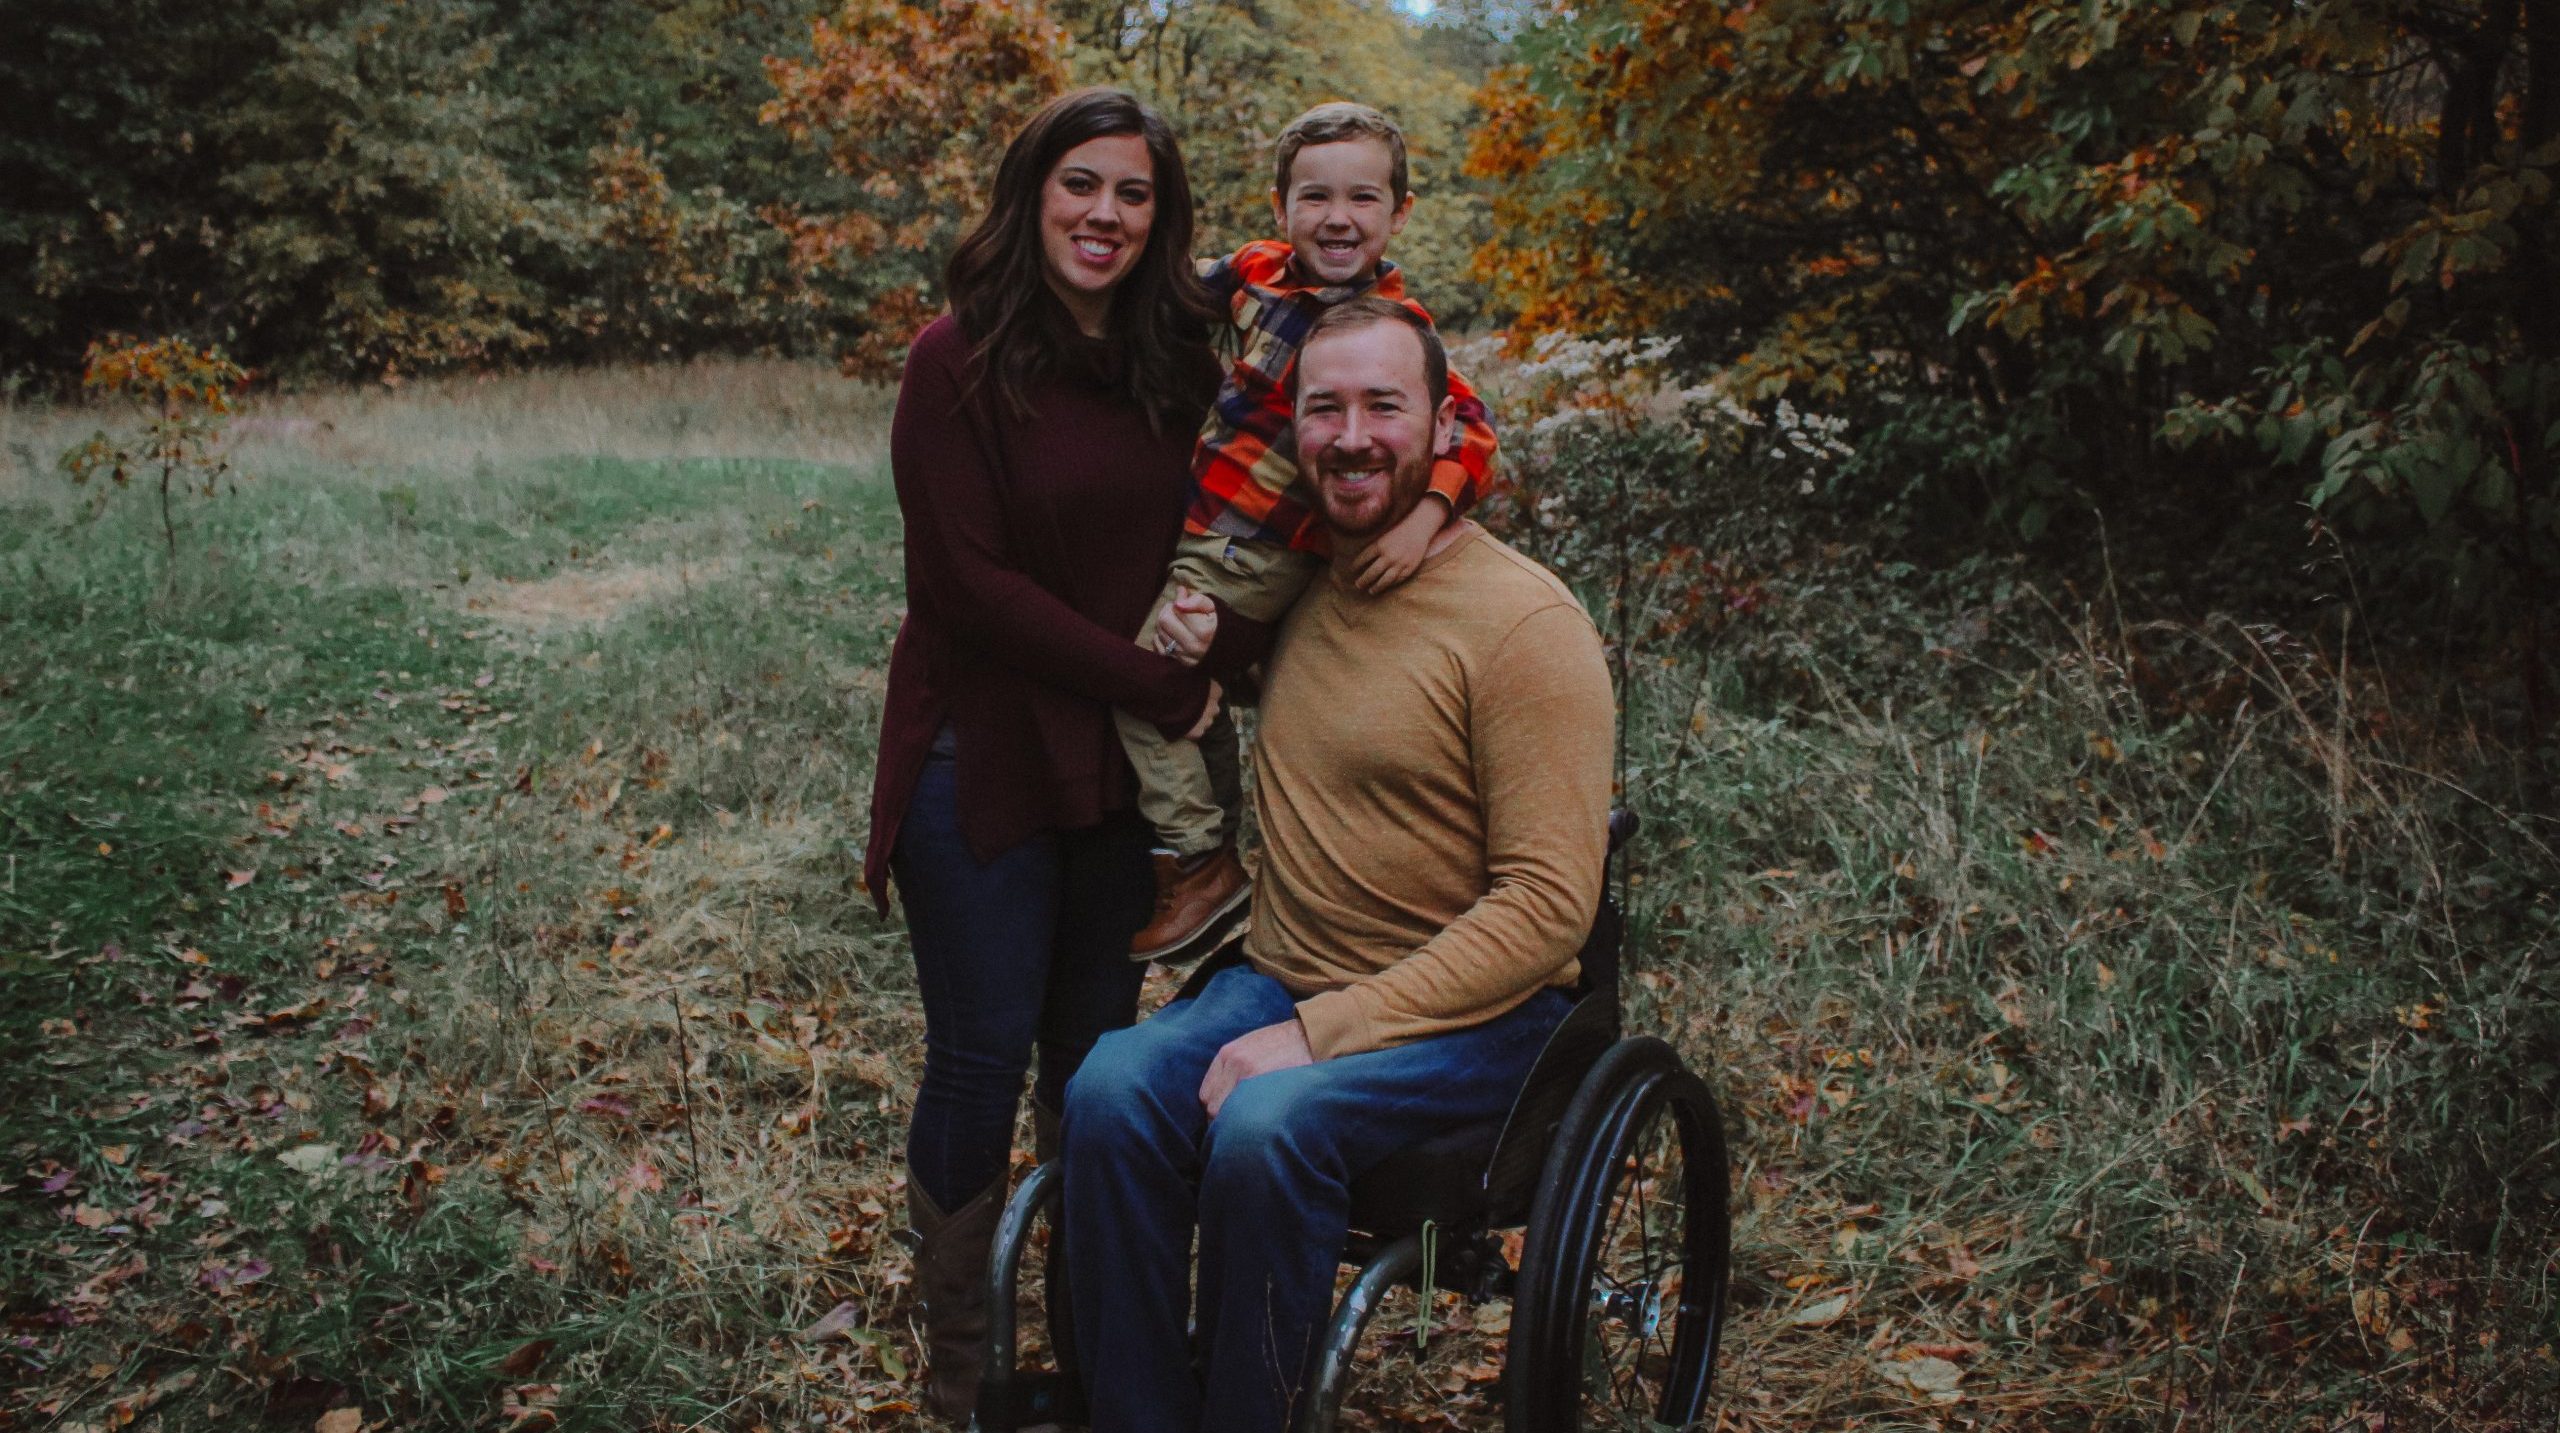 Mom holding toddler son next to dad in wheelchair.